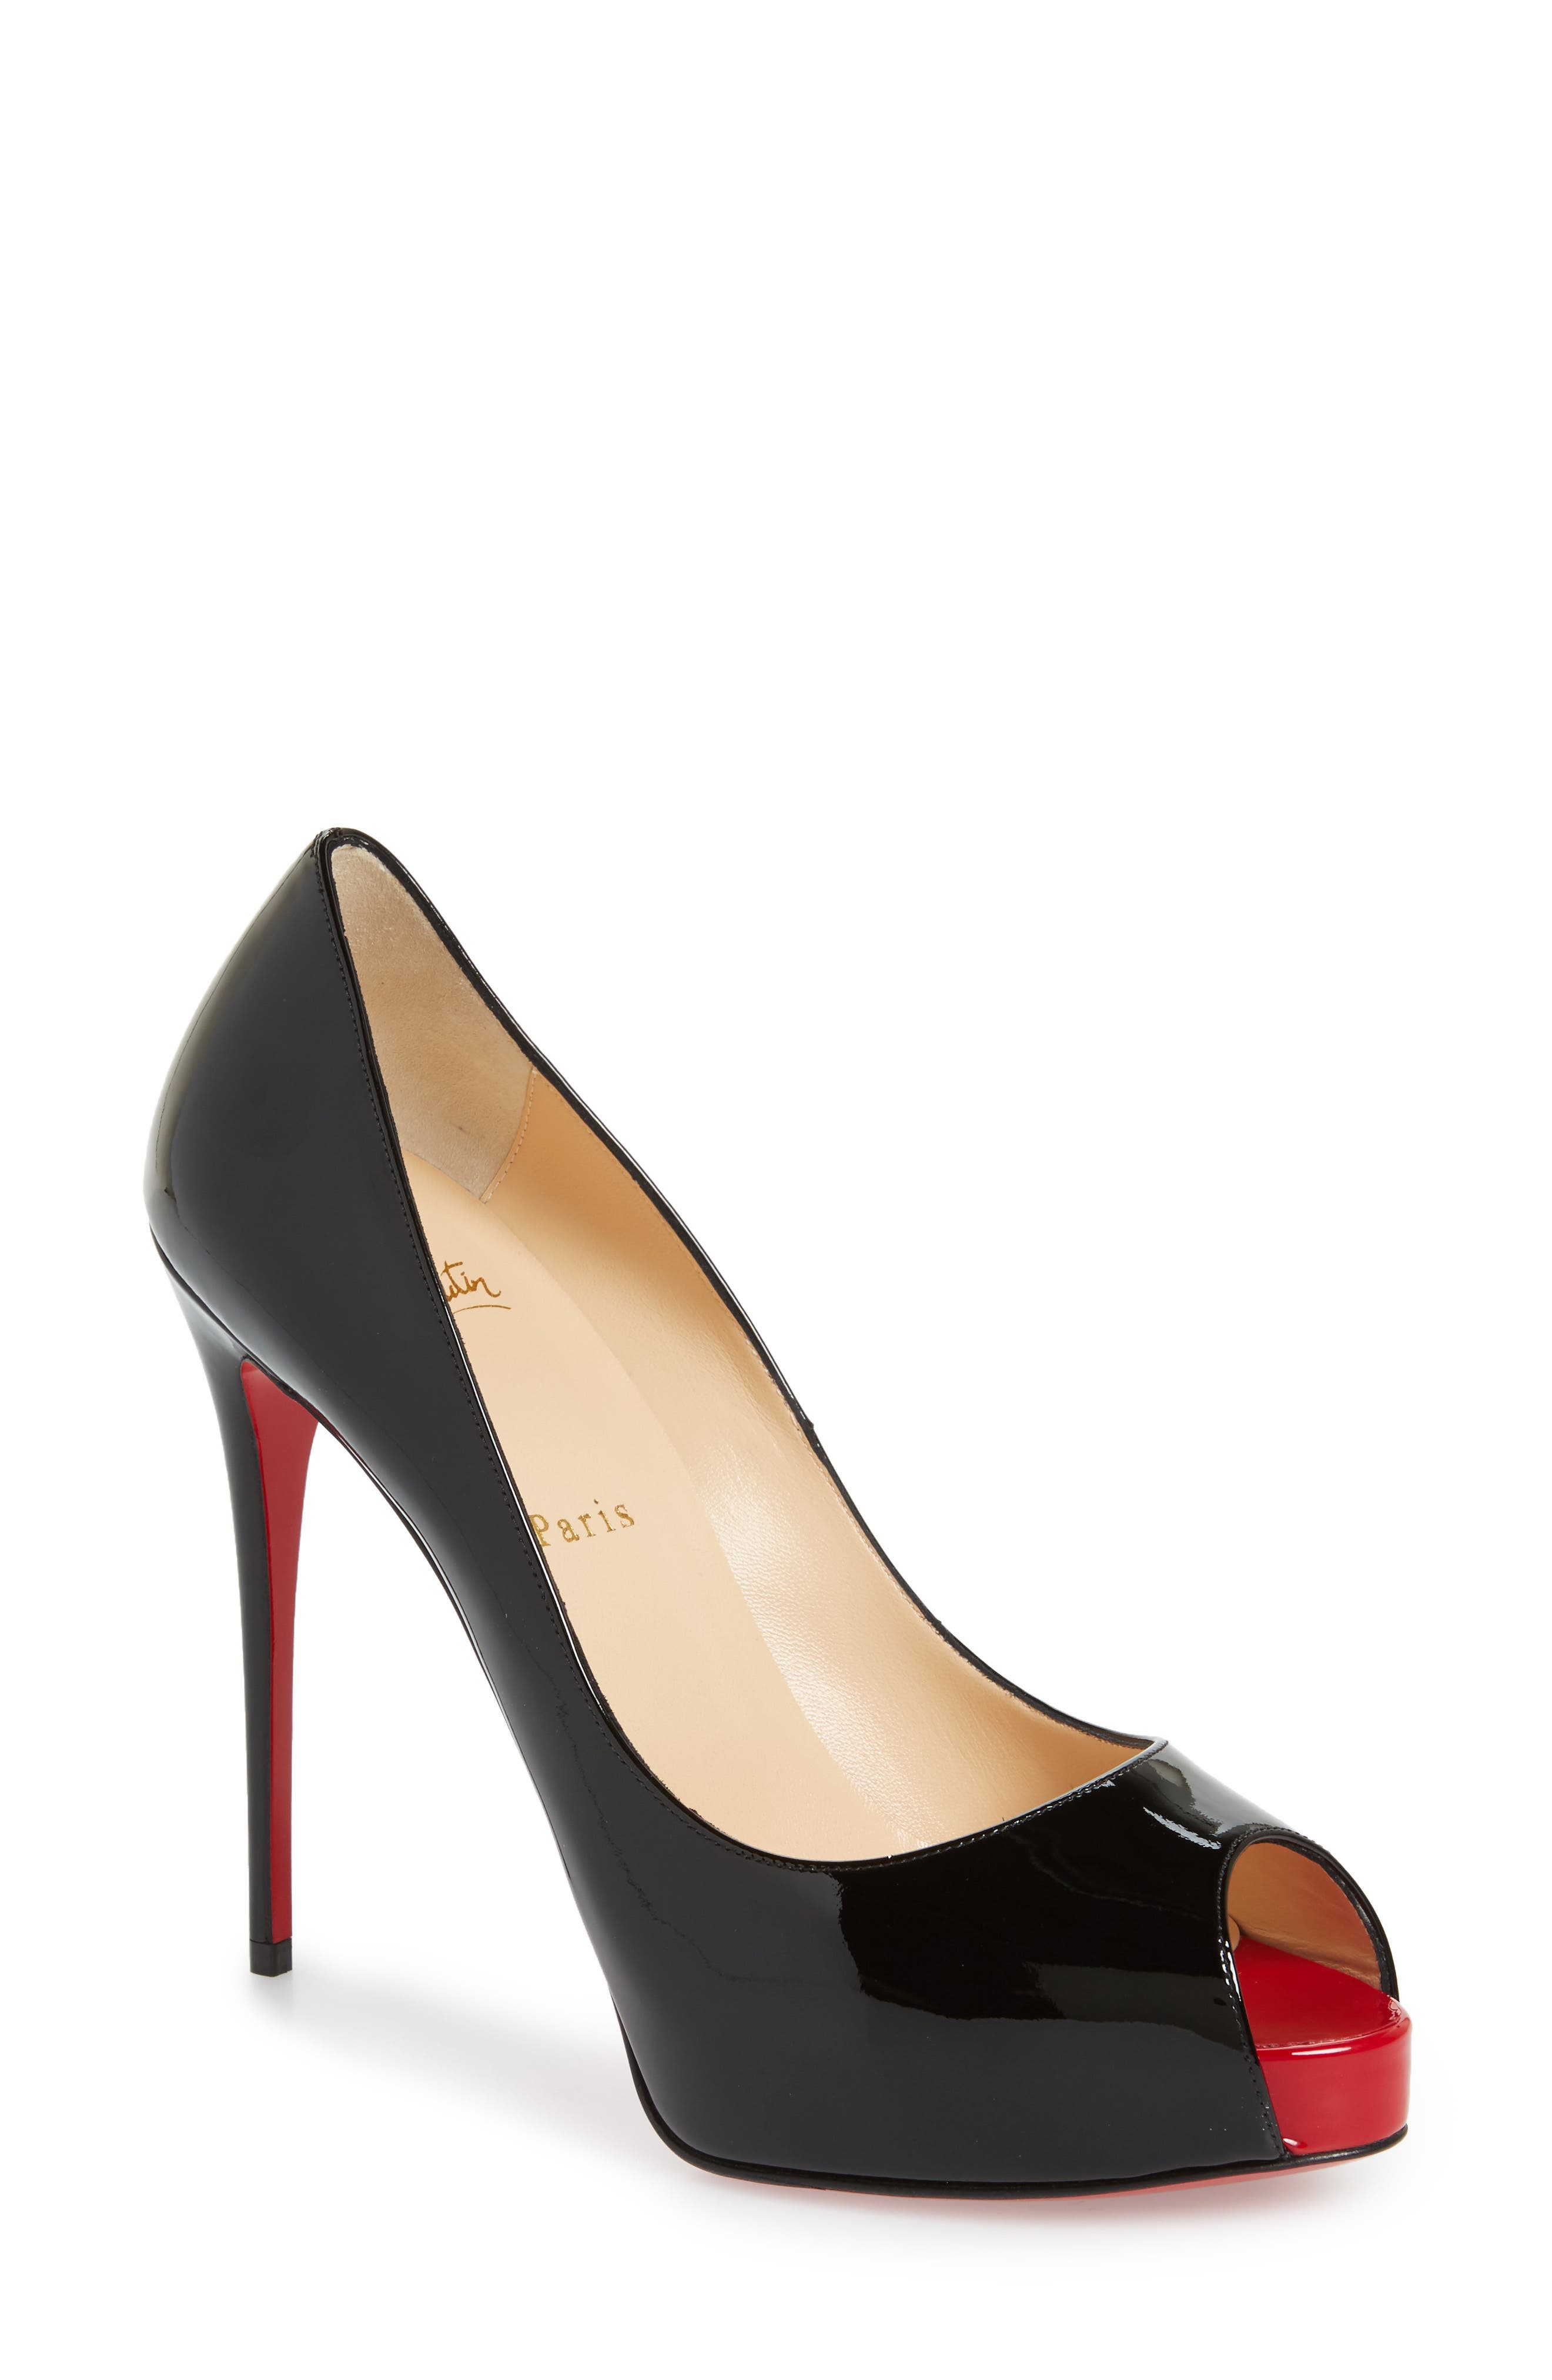 red louboutin pumps